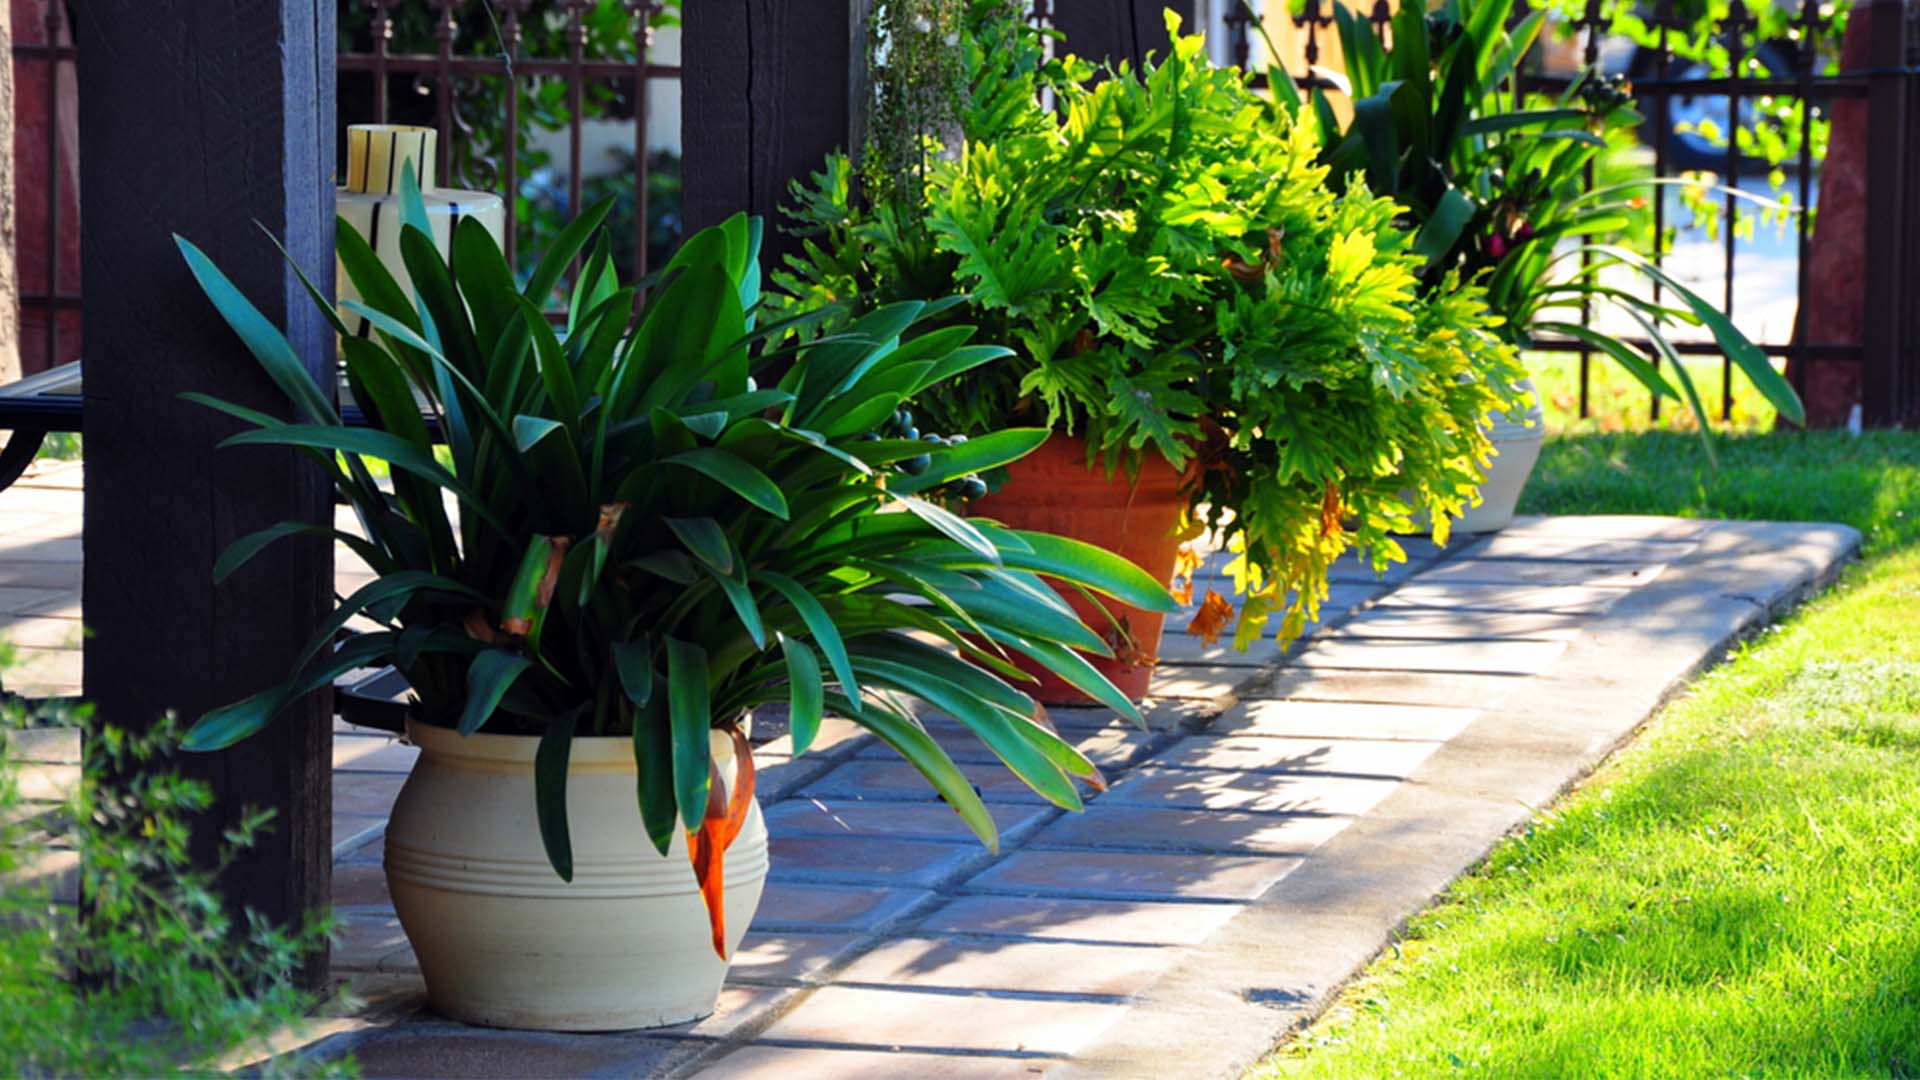 4 Tips to Protect Patio Plants from the Heat - TOMORROW'S WORLD TODAY®